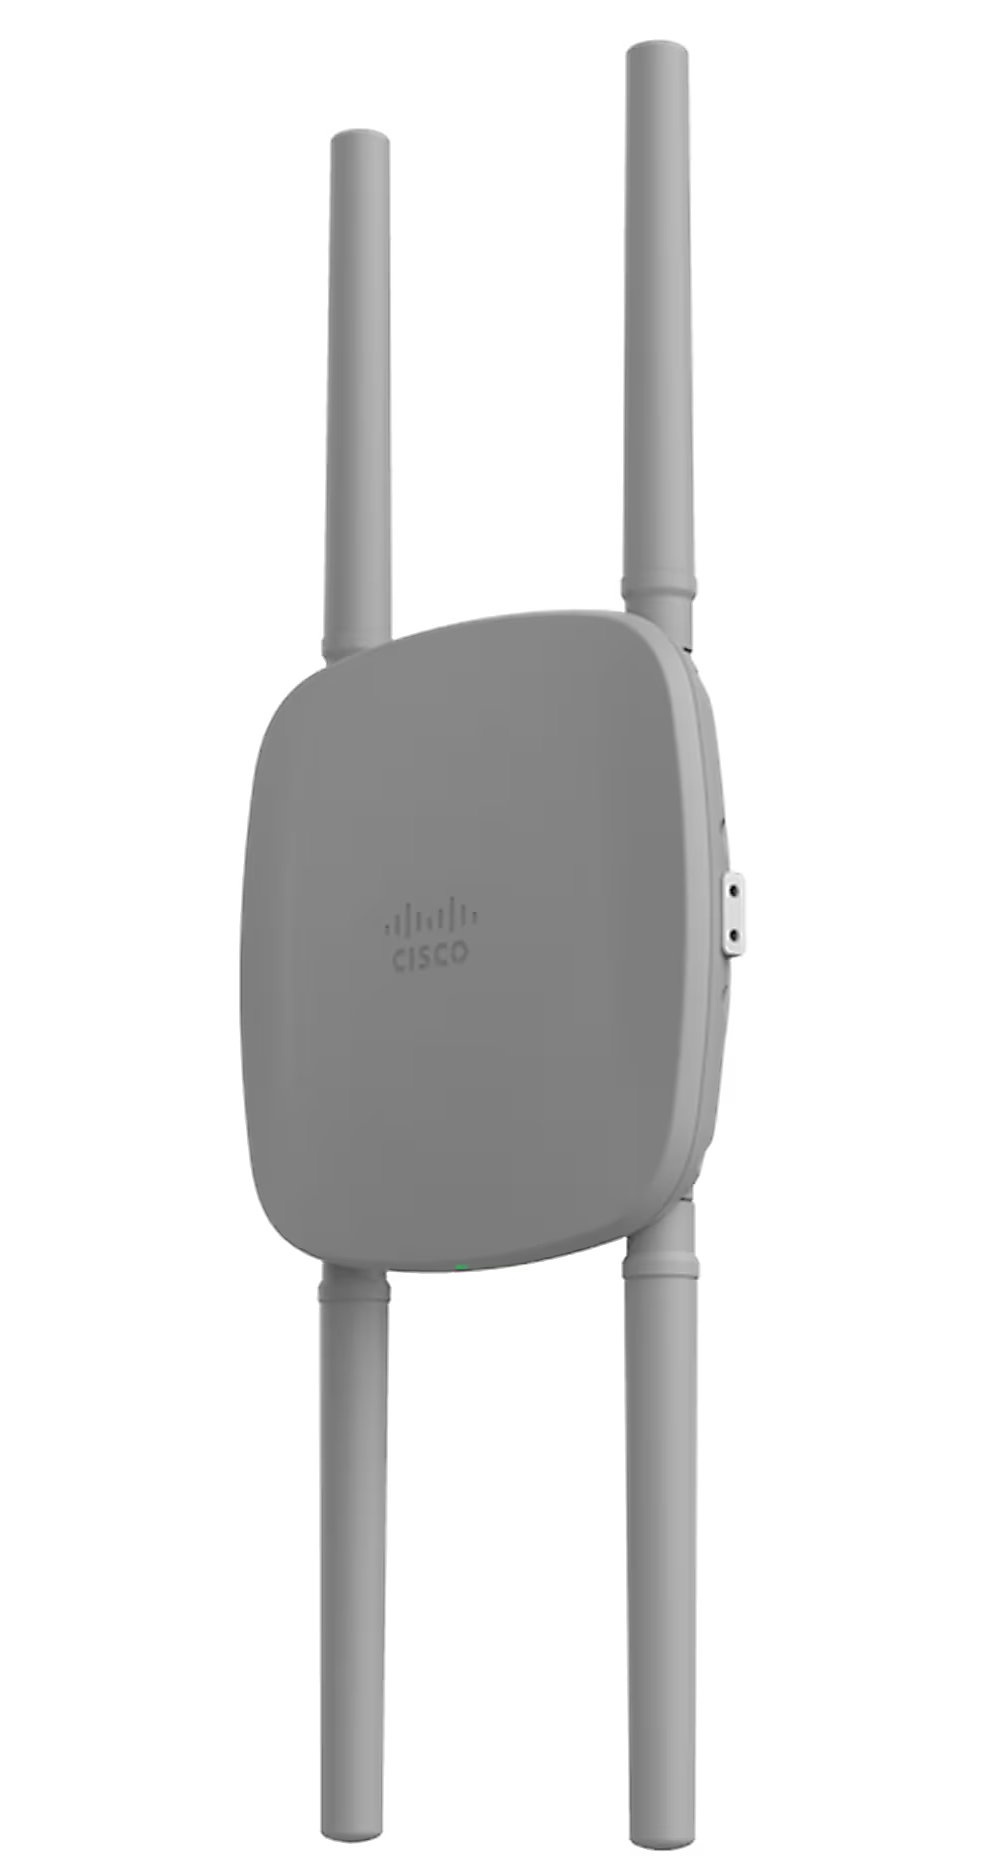 Catalyst 9163E, shown with omnidirectional dipole antennas (CW-ANT-O1-NS-00)